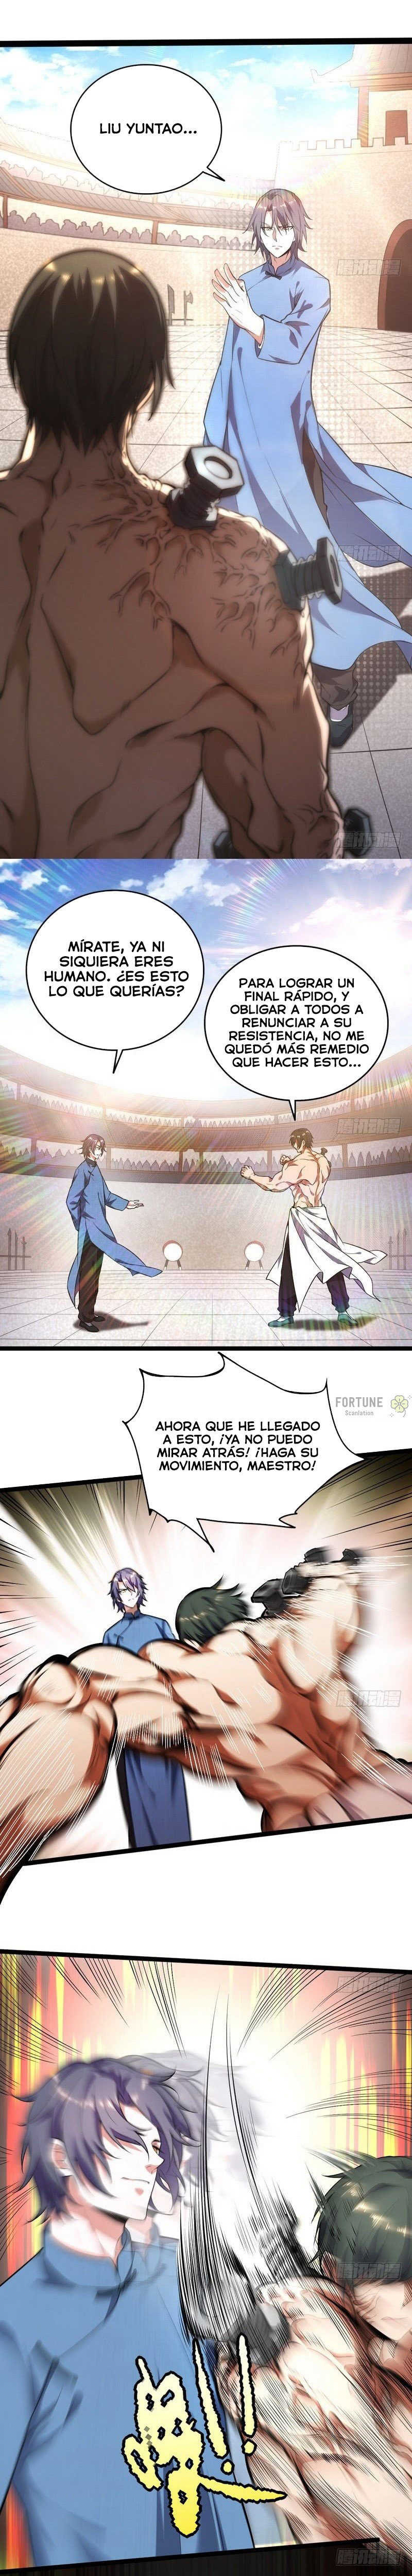 Manga Soy un dios maligno Chapter 20 image number 18